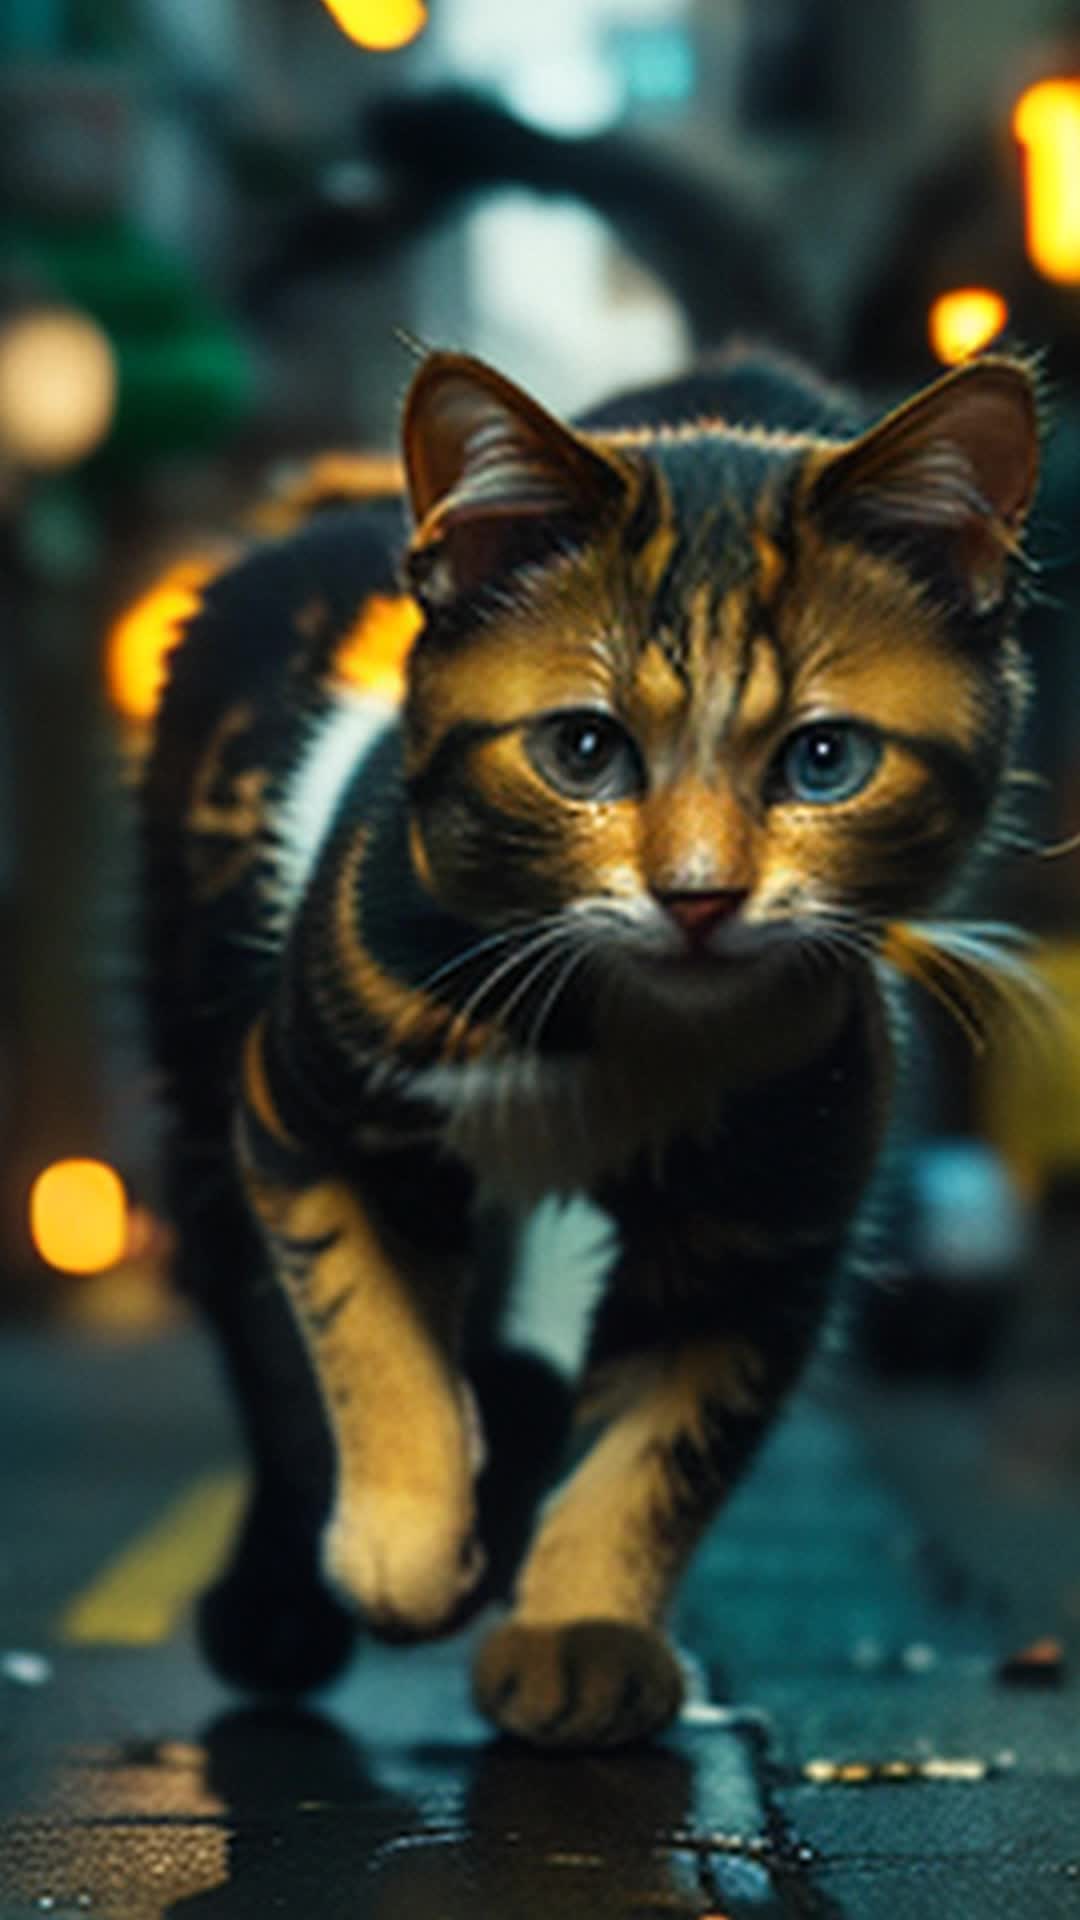 Kitten, alley cat darting into tight alleys, hopping over obstacles, city environment, high-energy action, sharp twists and turns, vivid detailing, soft shadows, dynamic camera movement